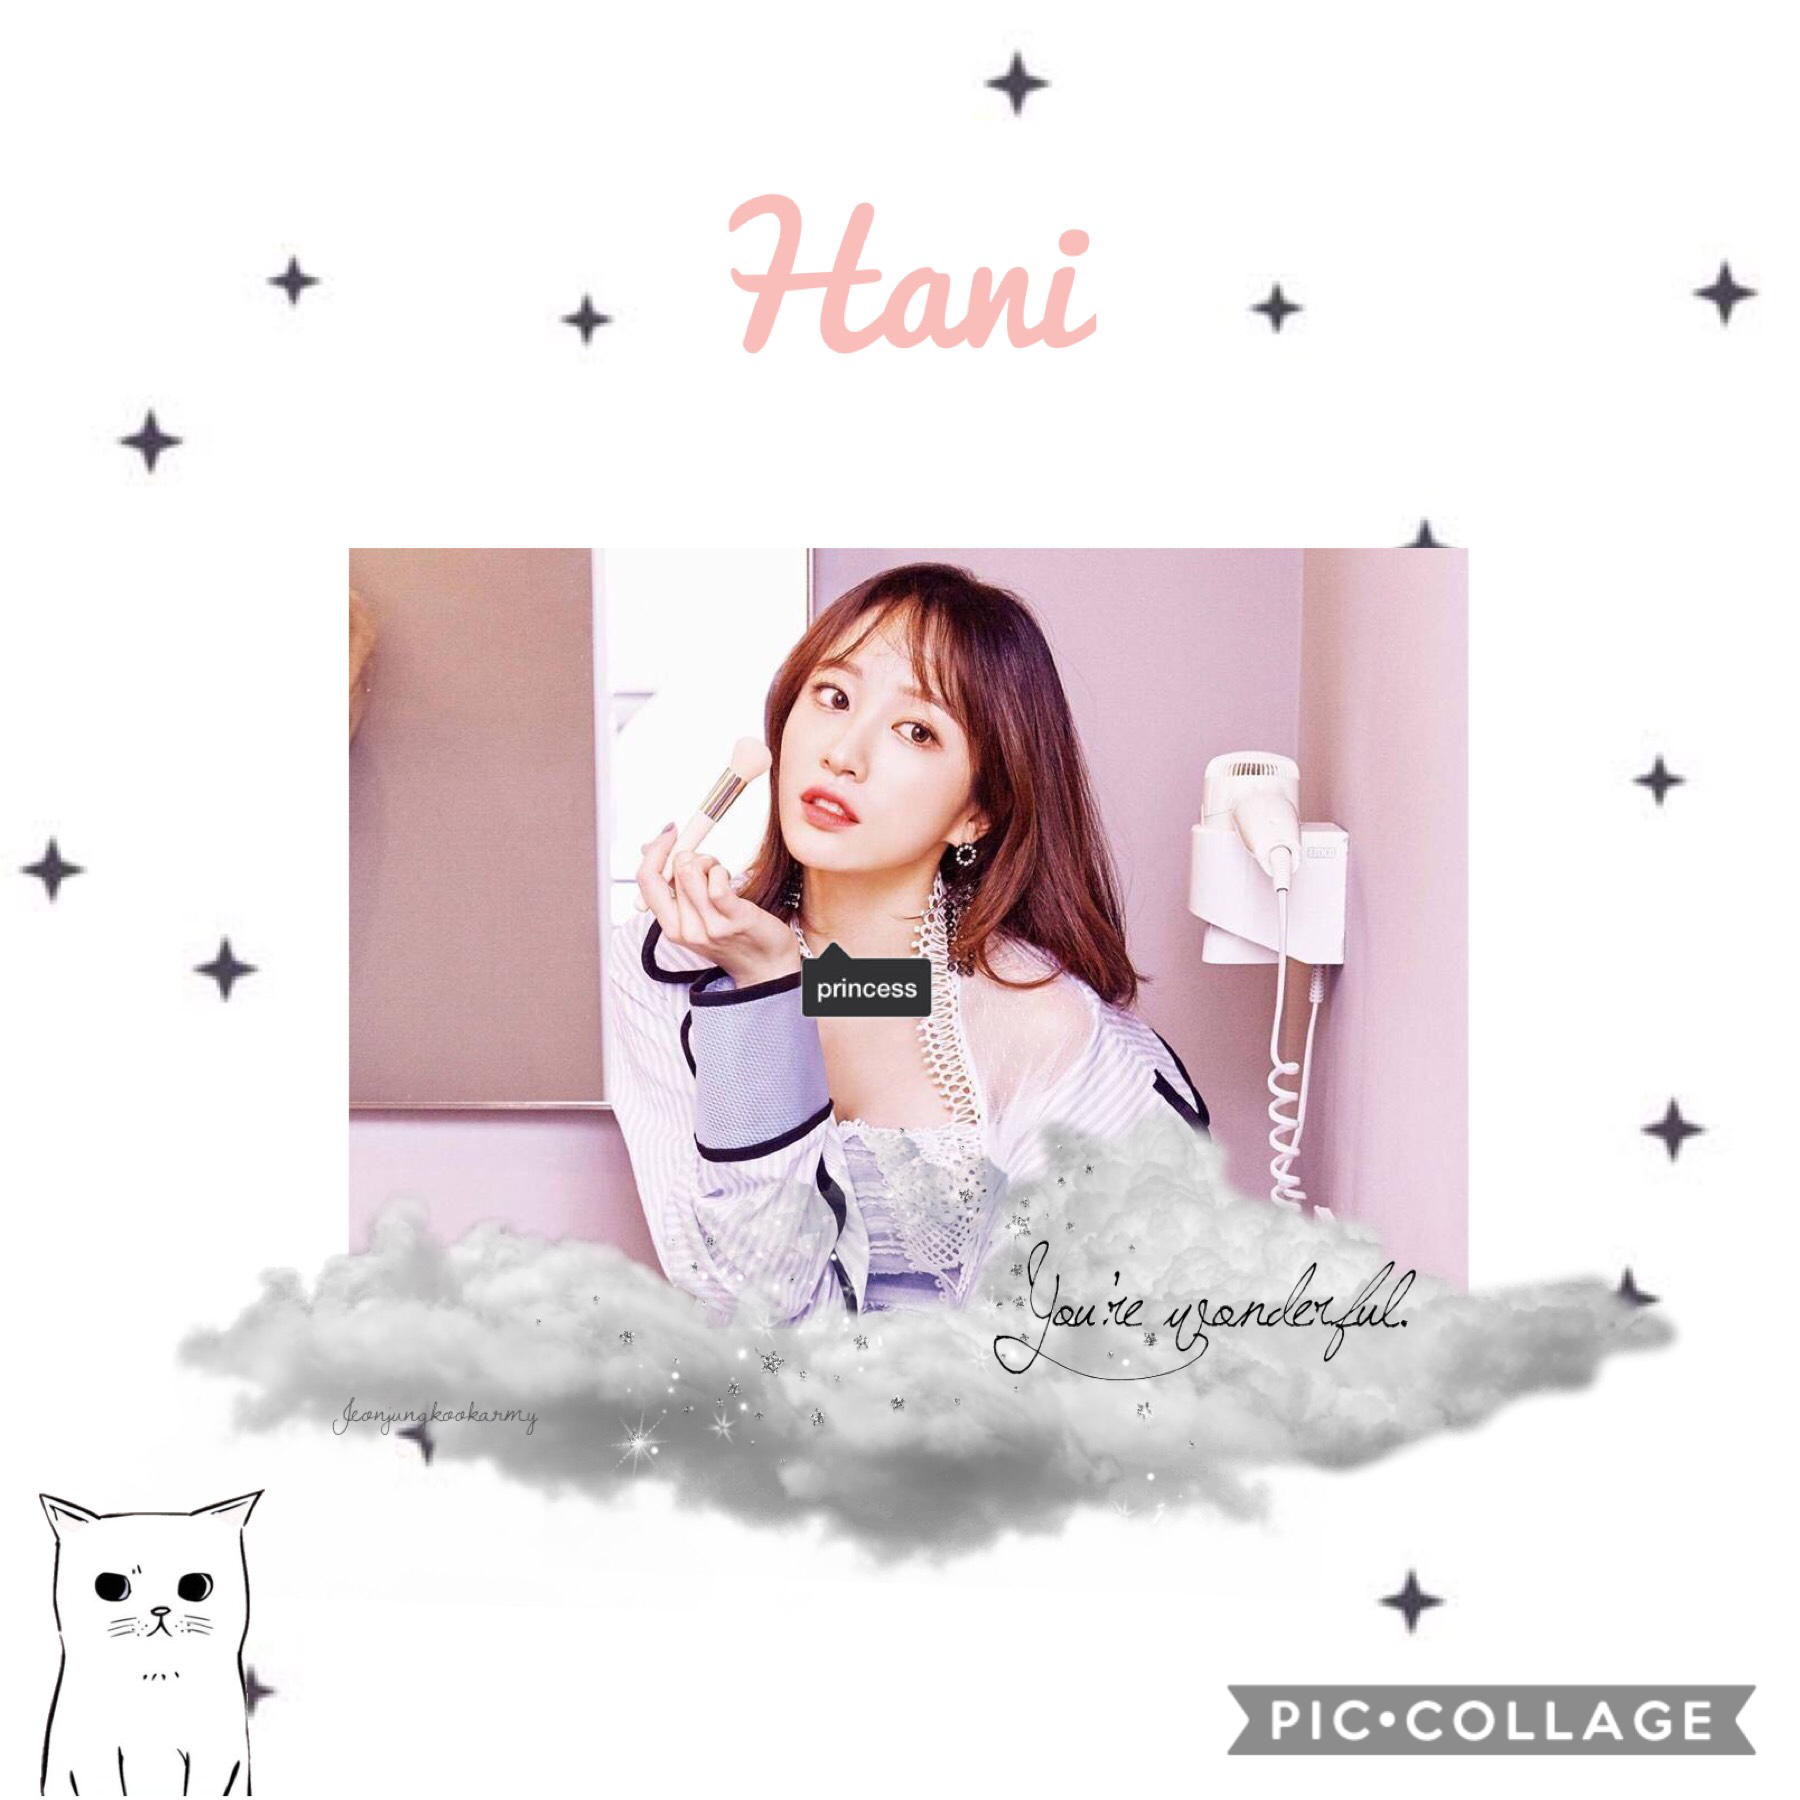 🍓tap🍓
Hey
It’s so sad to hear that Hani is leaving E.X.I.D
that’s why I made this!
And shoutouts to @peachy_min @trashy_love @whimz and @just_peachy for leading me through this journey!!